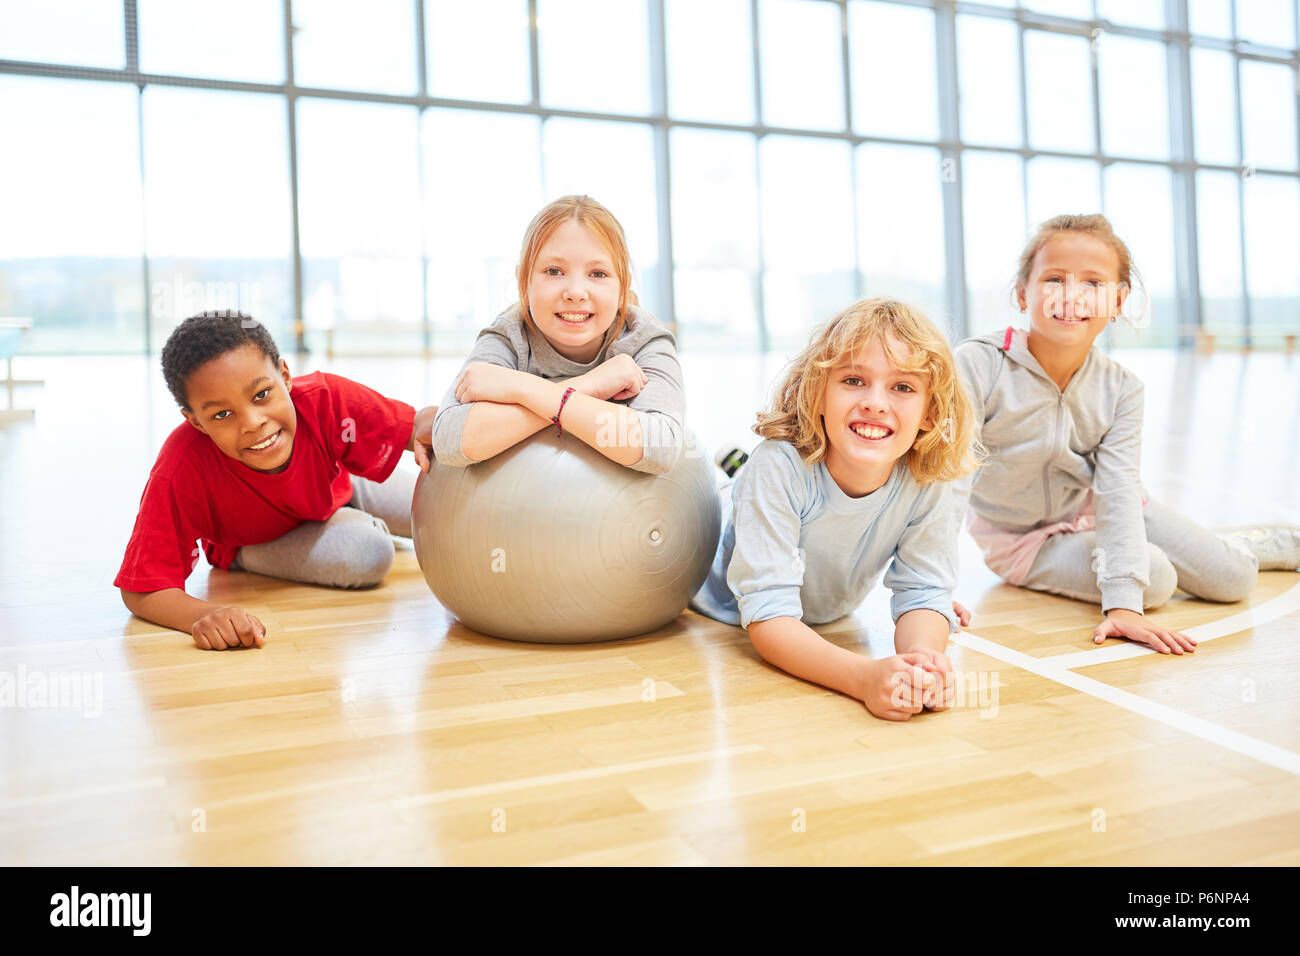 Group of kids in elementary school physical education with a gym ball Stock Photo